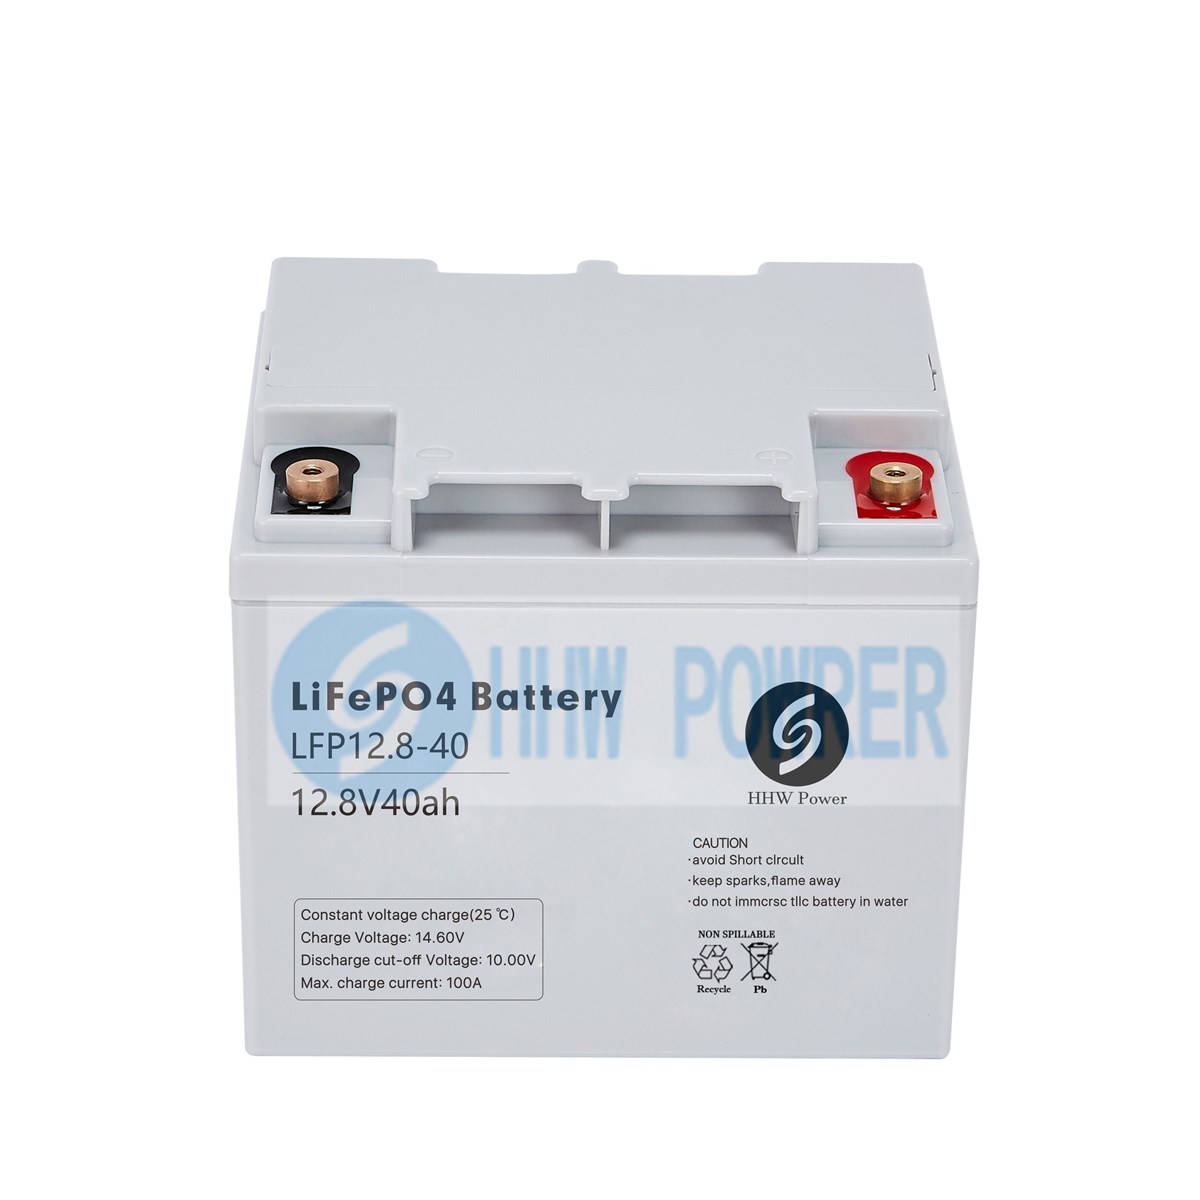 12.8v40ah LiFePO4, Deep Cycle & High Performance Designed For For UPS & Solar Power System Applications